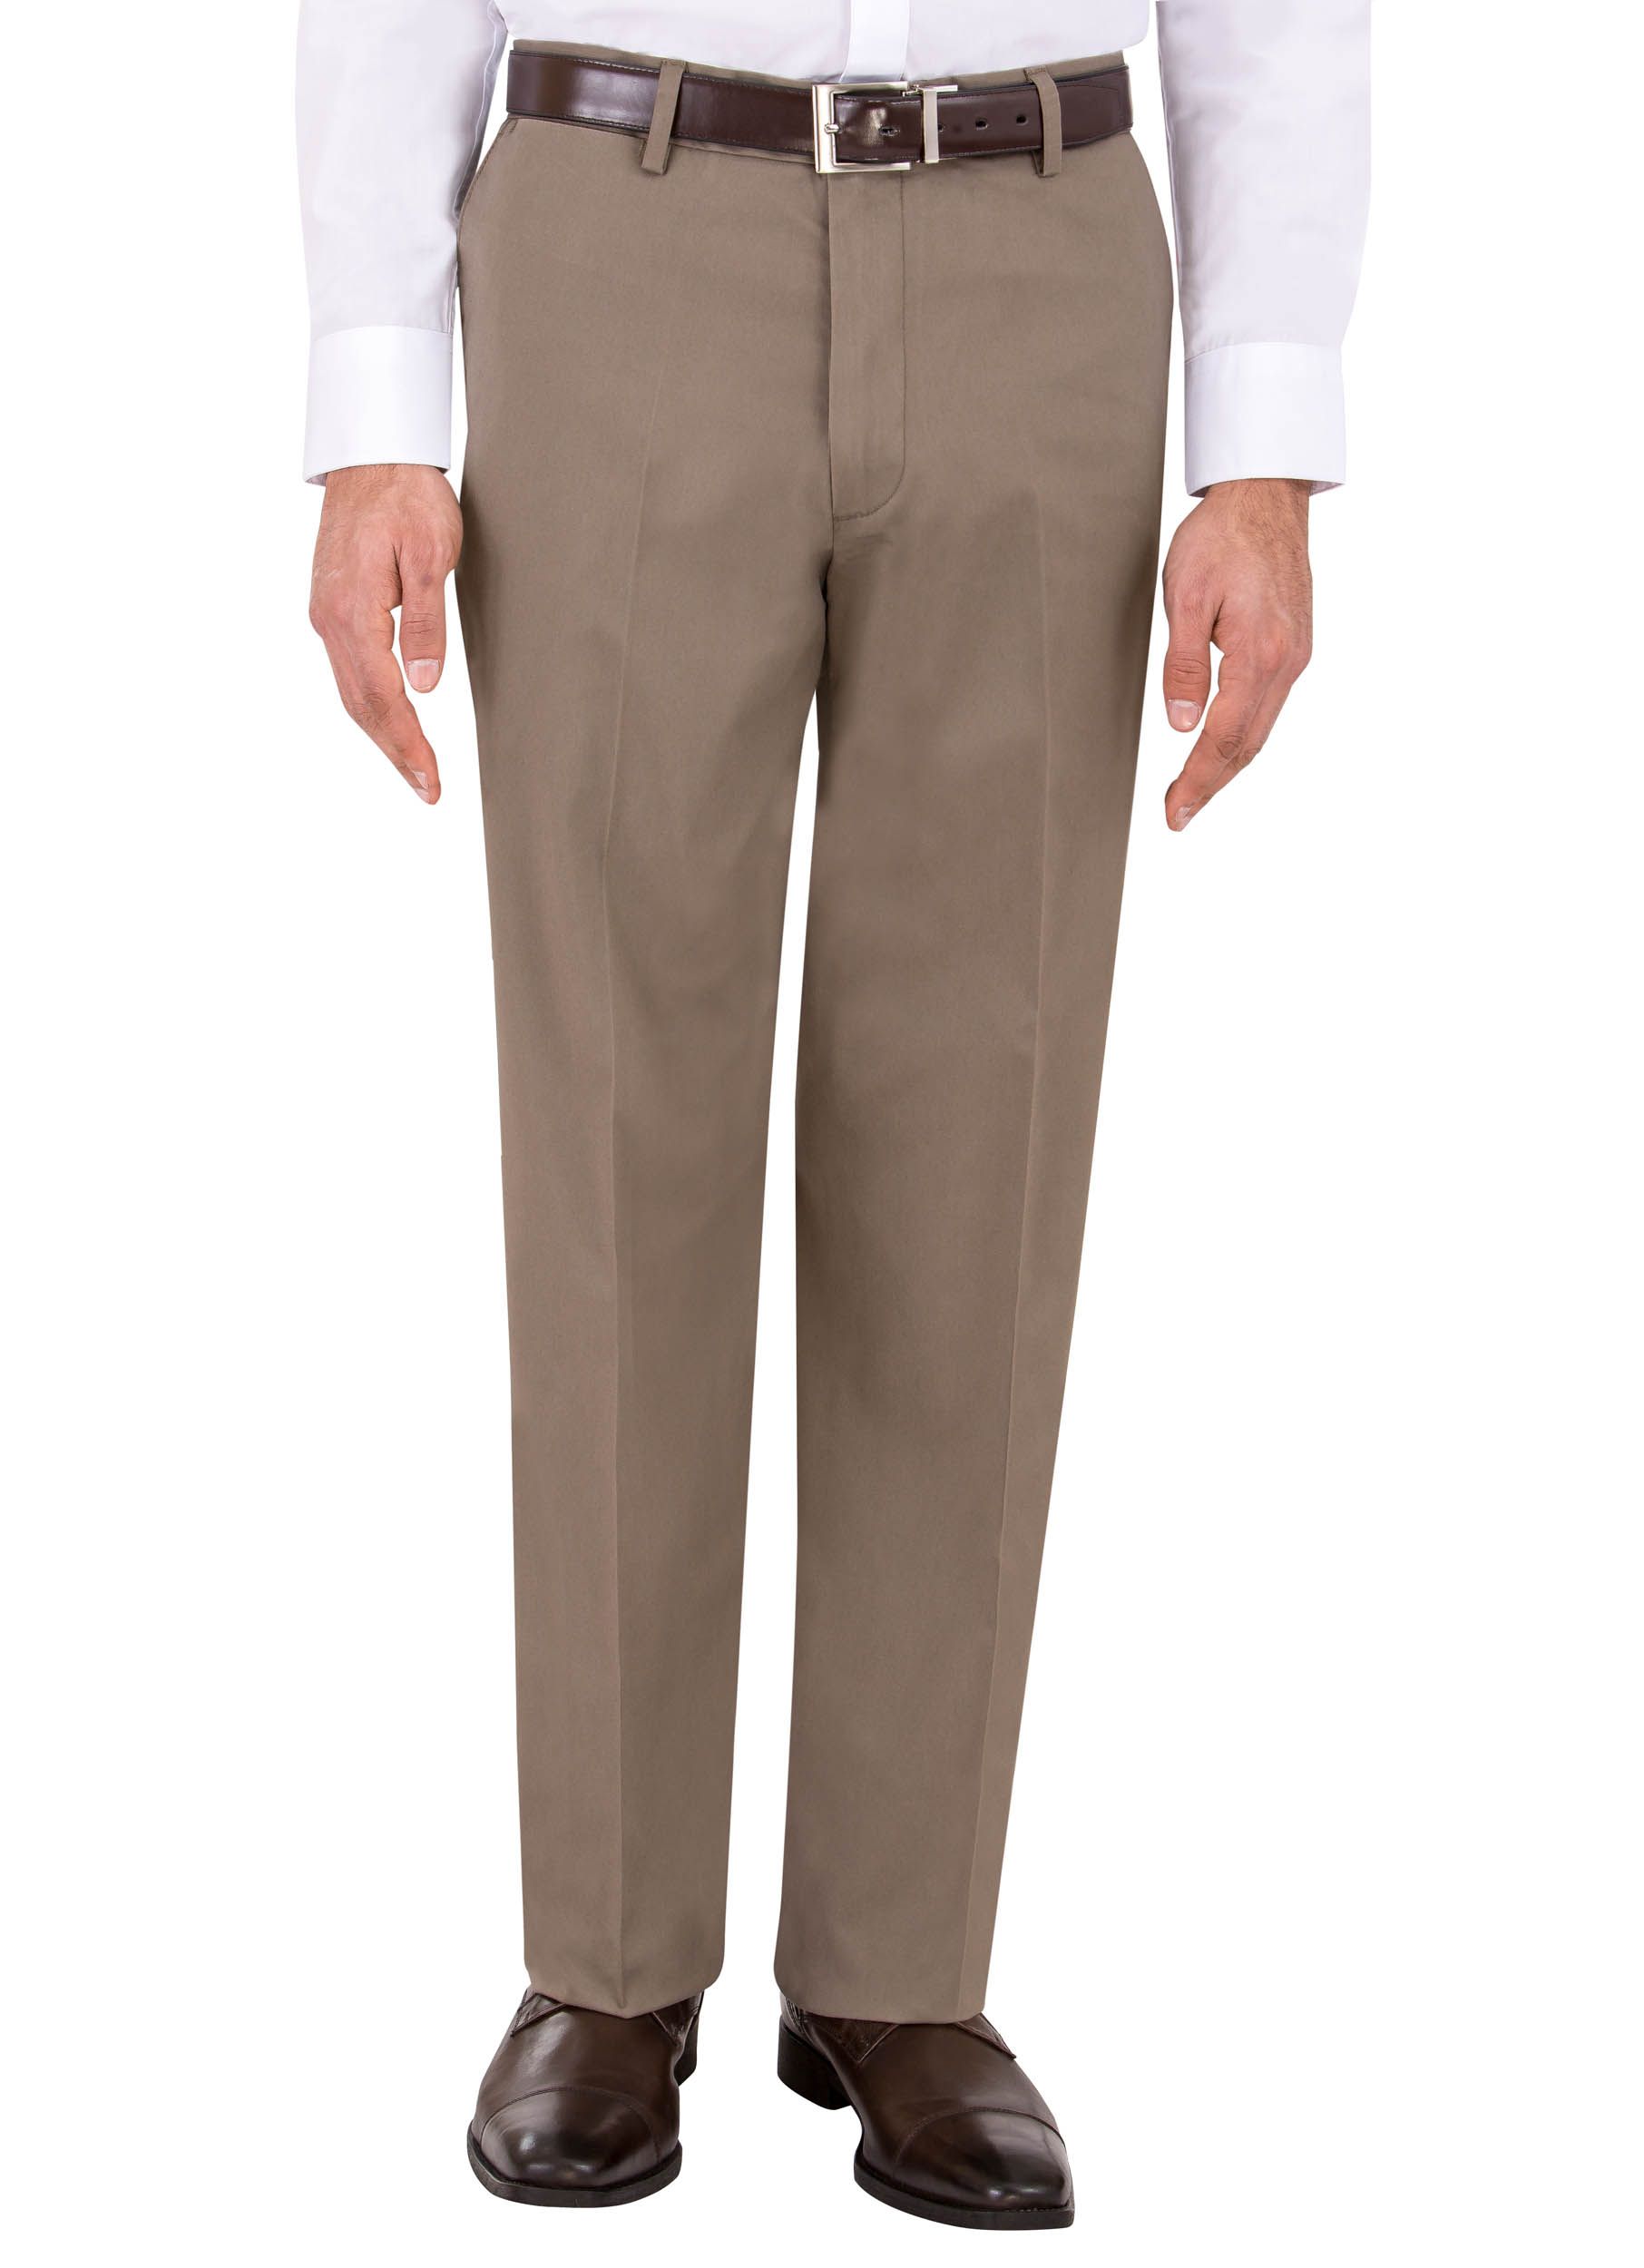 Dockers Mens No Wrinkle Stretch Khaki Straigh-Fit Flat-Front Pant